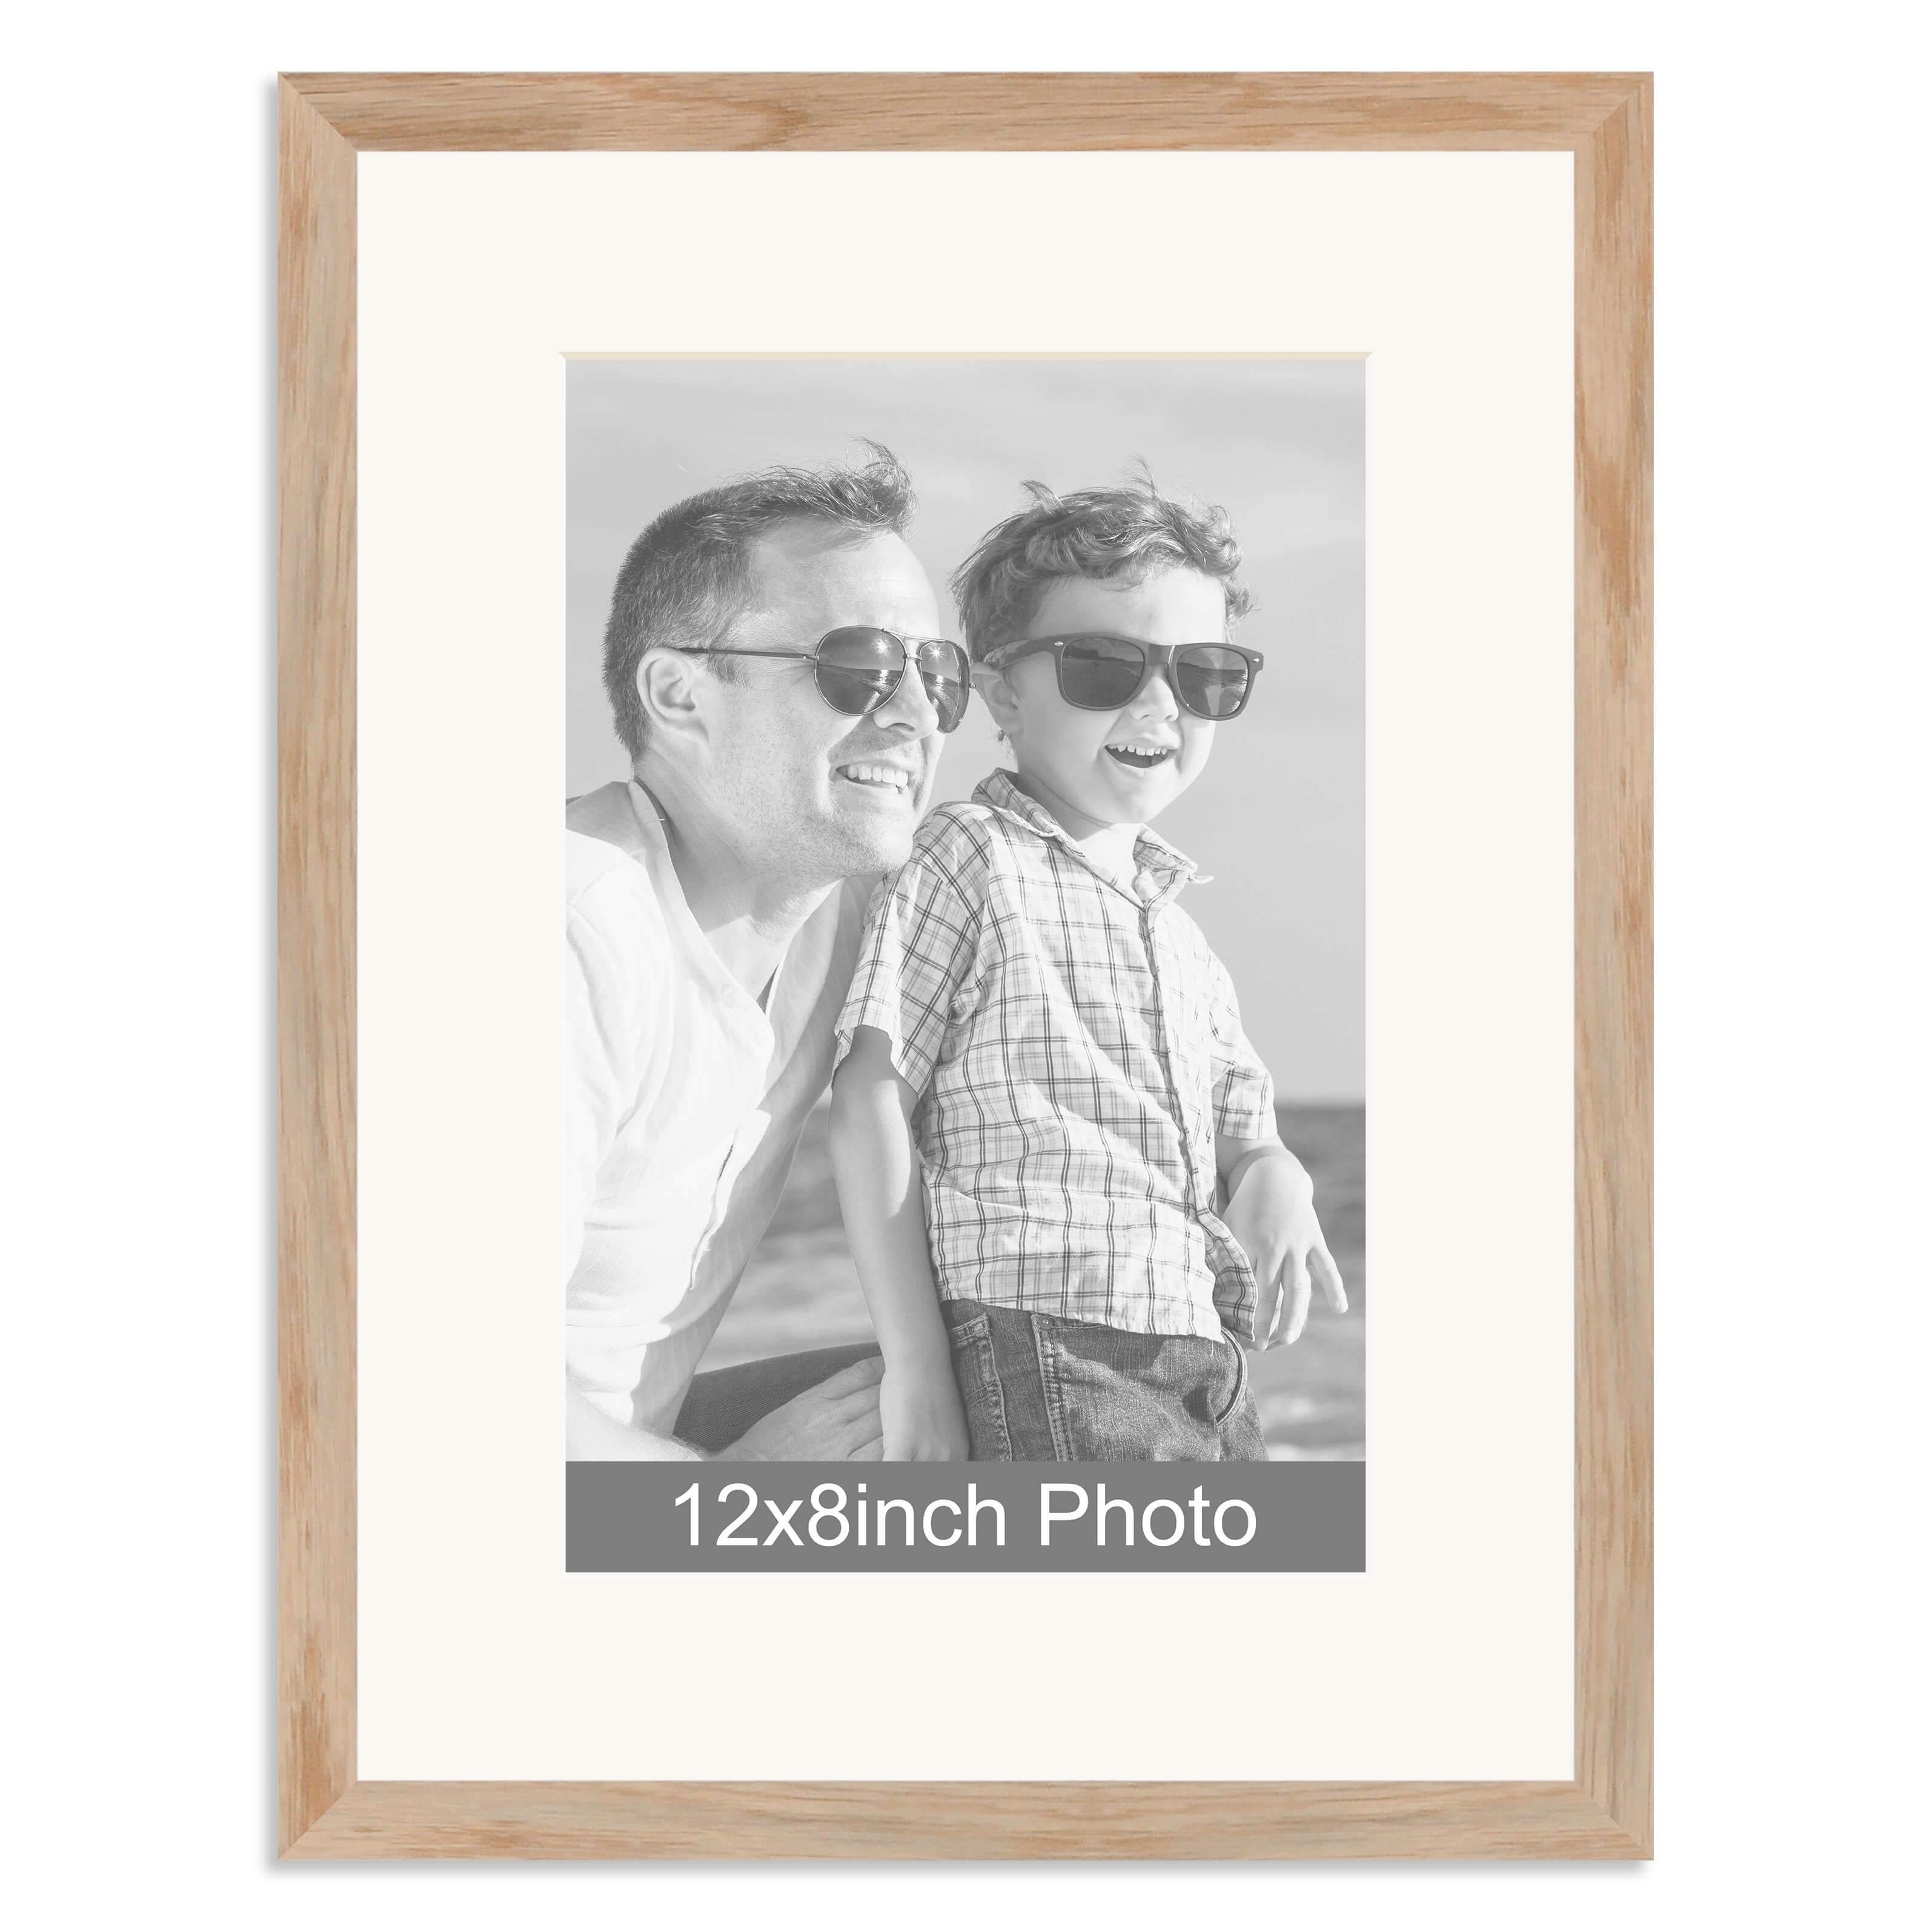 Solid Oak Wooden Photo Frame for a 12×8/8x12in Photo